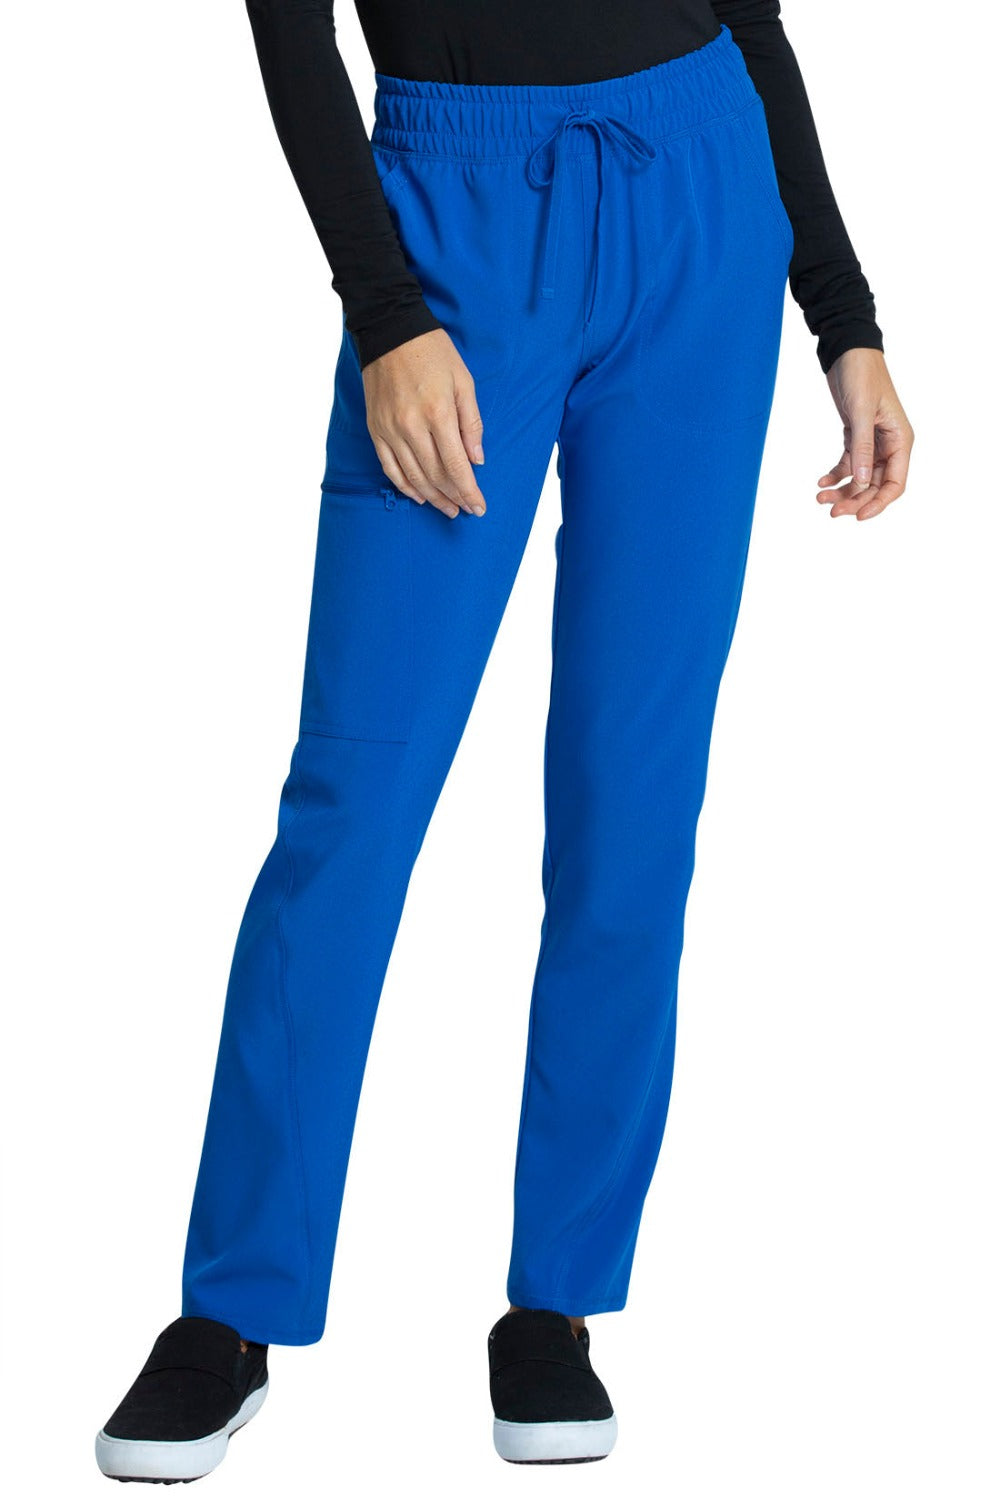 Cherokee Allura Petite Scrub Pant Mid Rise Tapered Leg Drawstring in Royal at Parker's Clothing and Shoes.